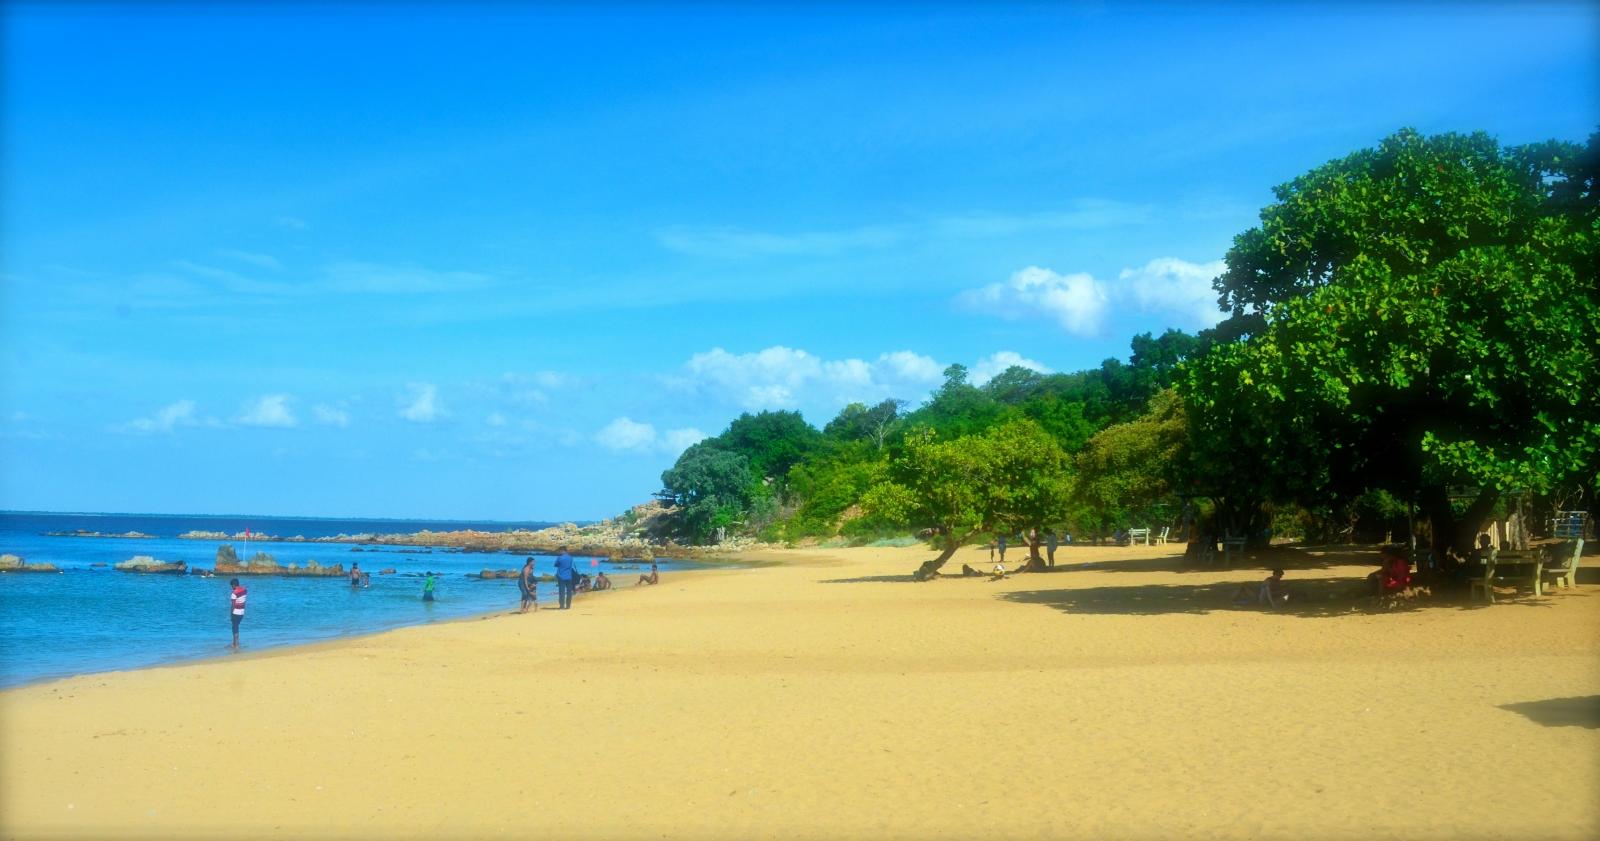 A scenic view of Marble Beach in Sri Lanka where volunteers can spend their free time